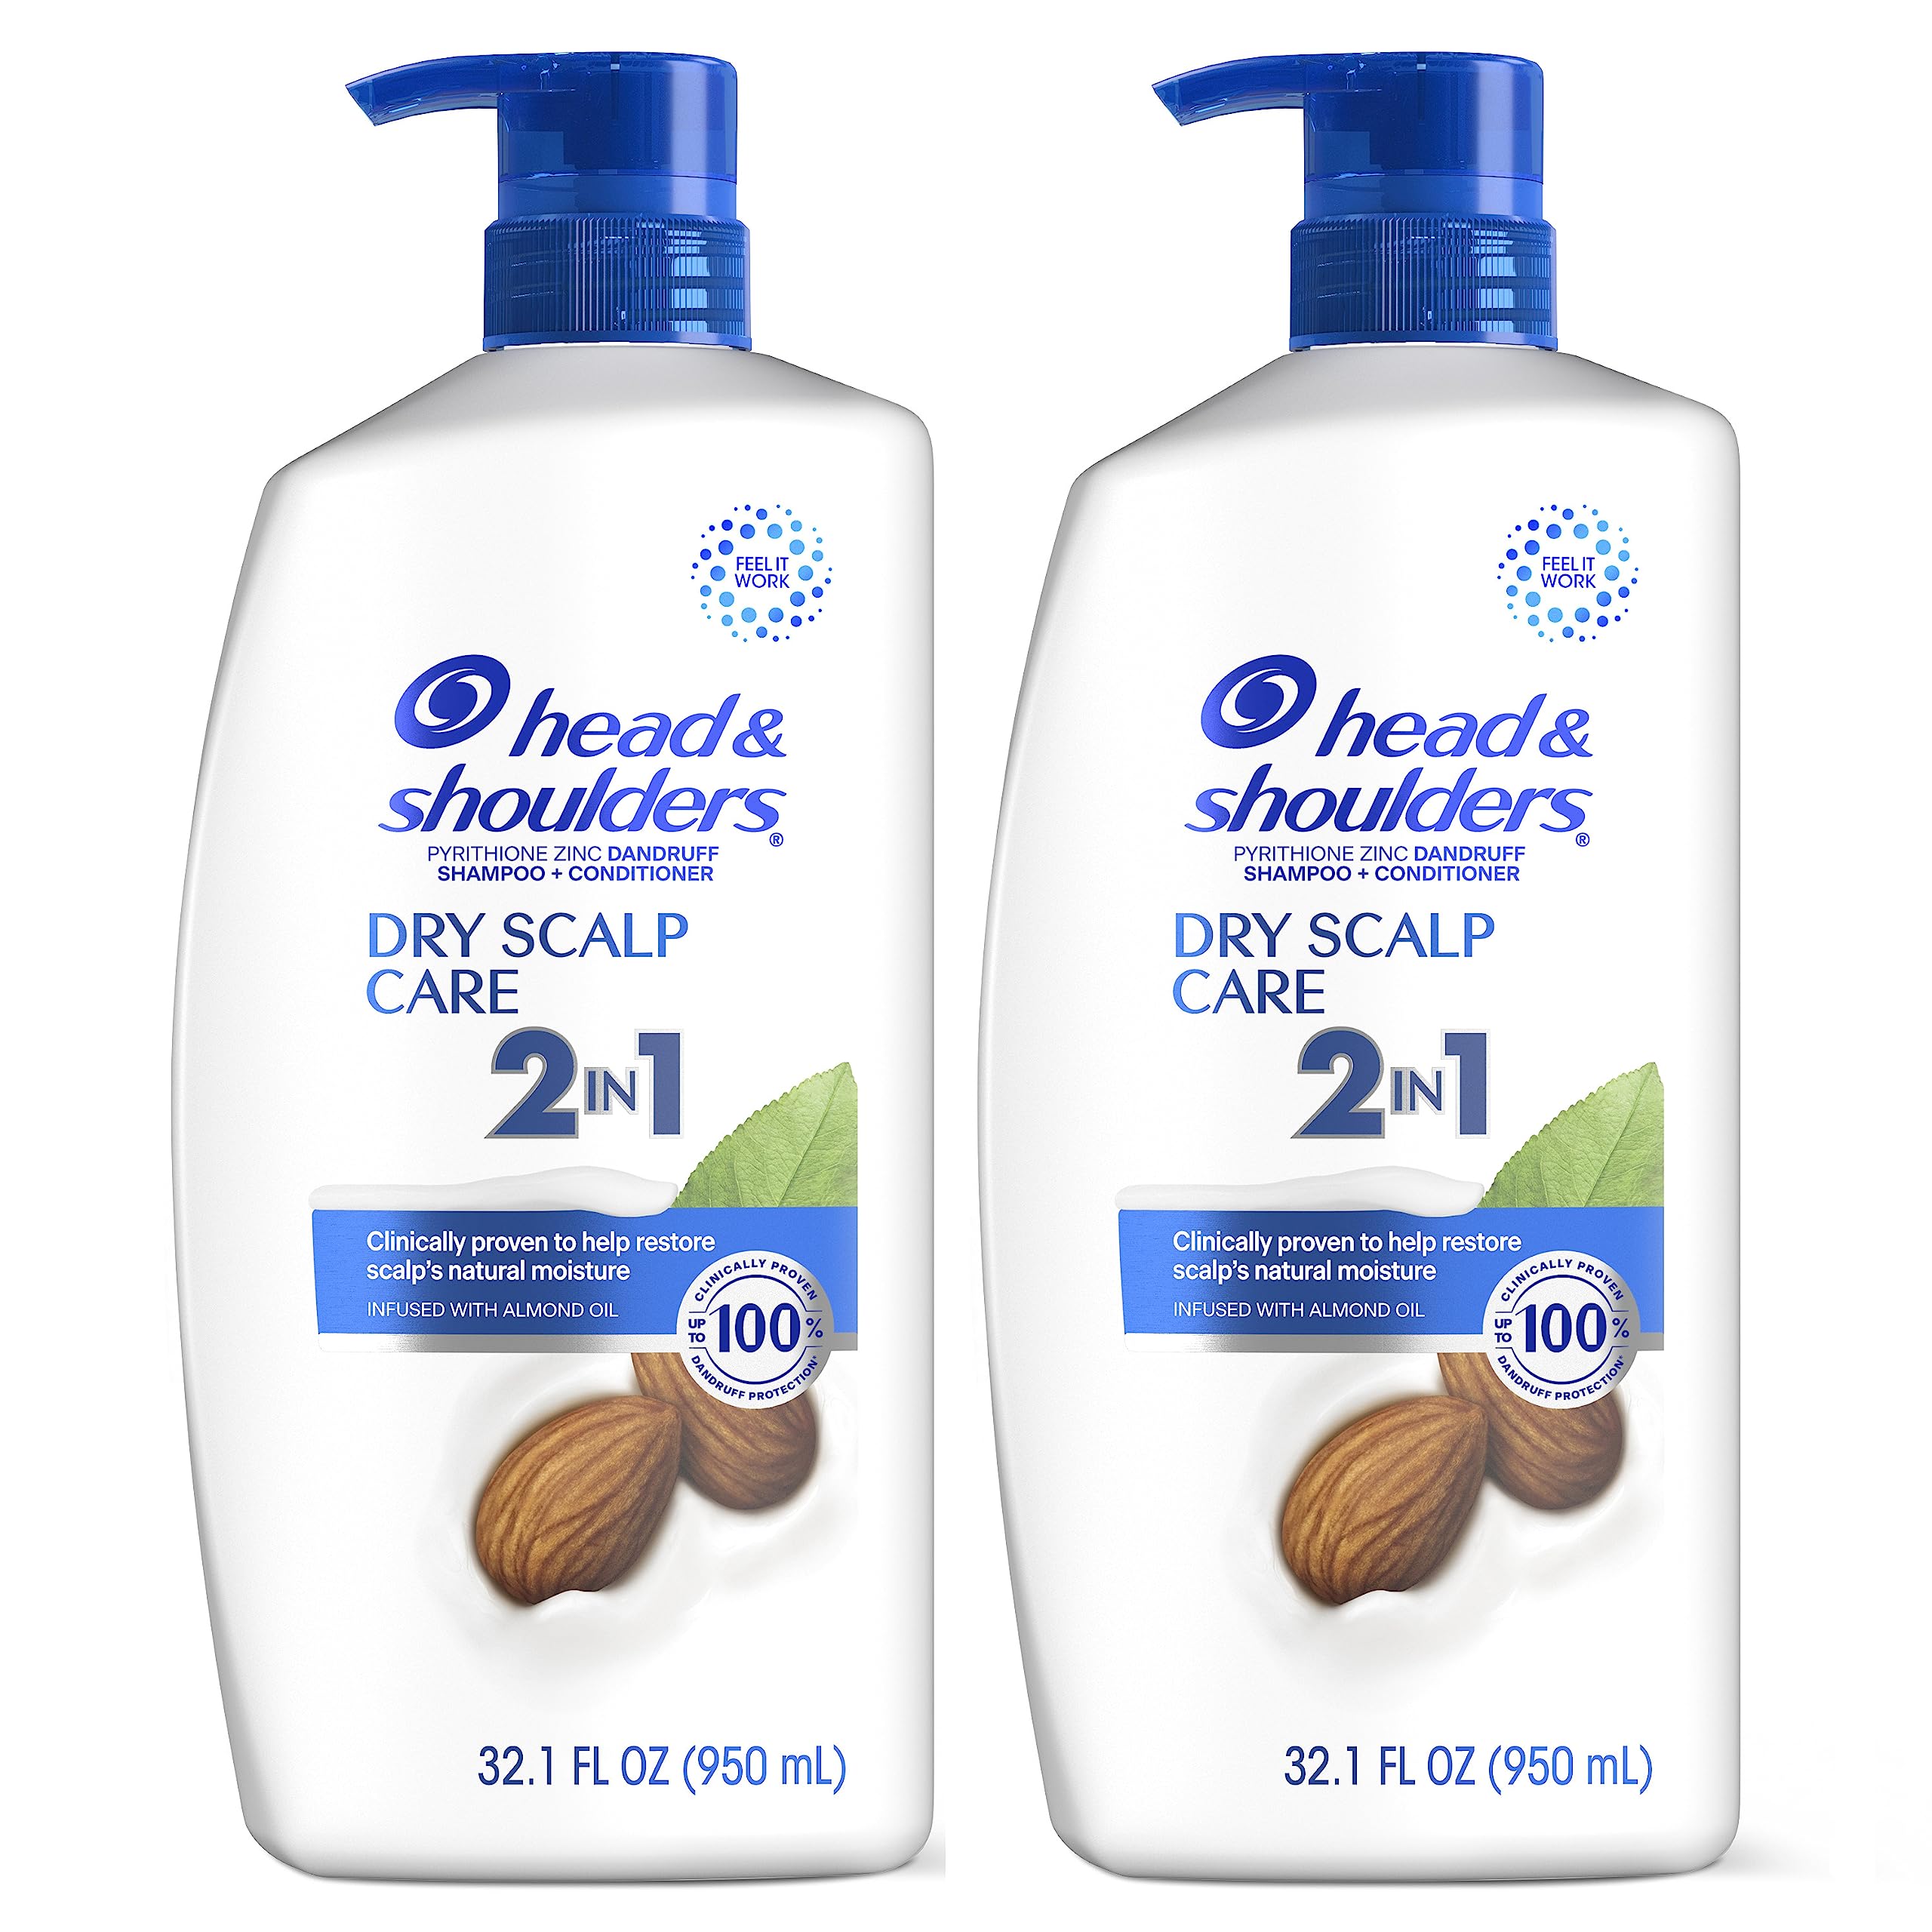 Head and Shoulders Shampoo and Conditioner 2 in 1, Anti Dandruff Treatment, Dry Scalp Care with Almond Oil, 32.1 fl oz, Twin Pack (Packaging May Vary)